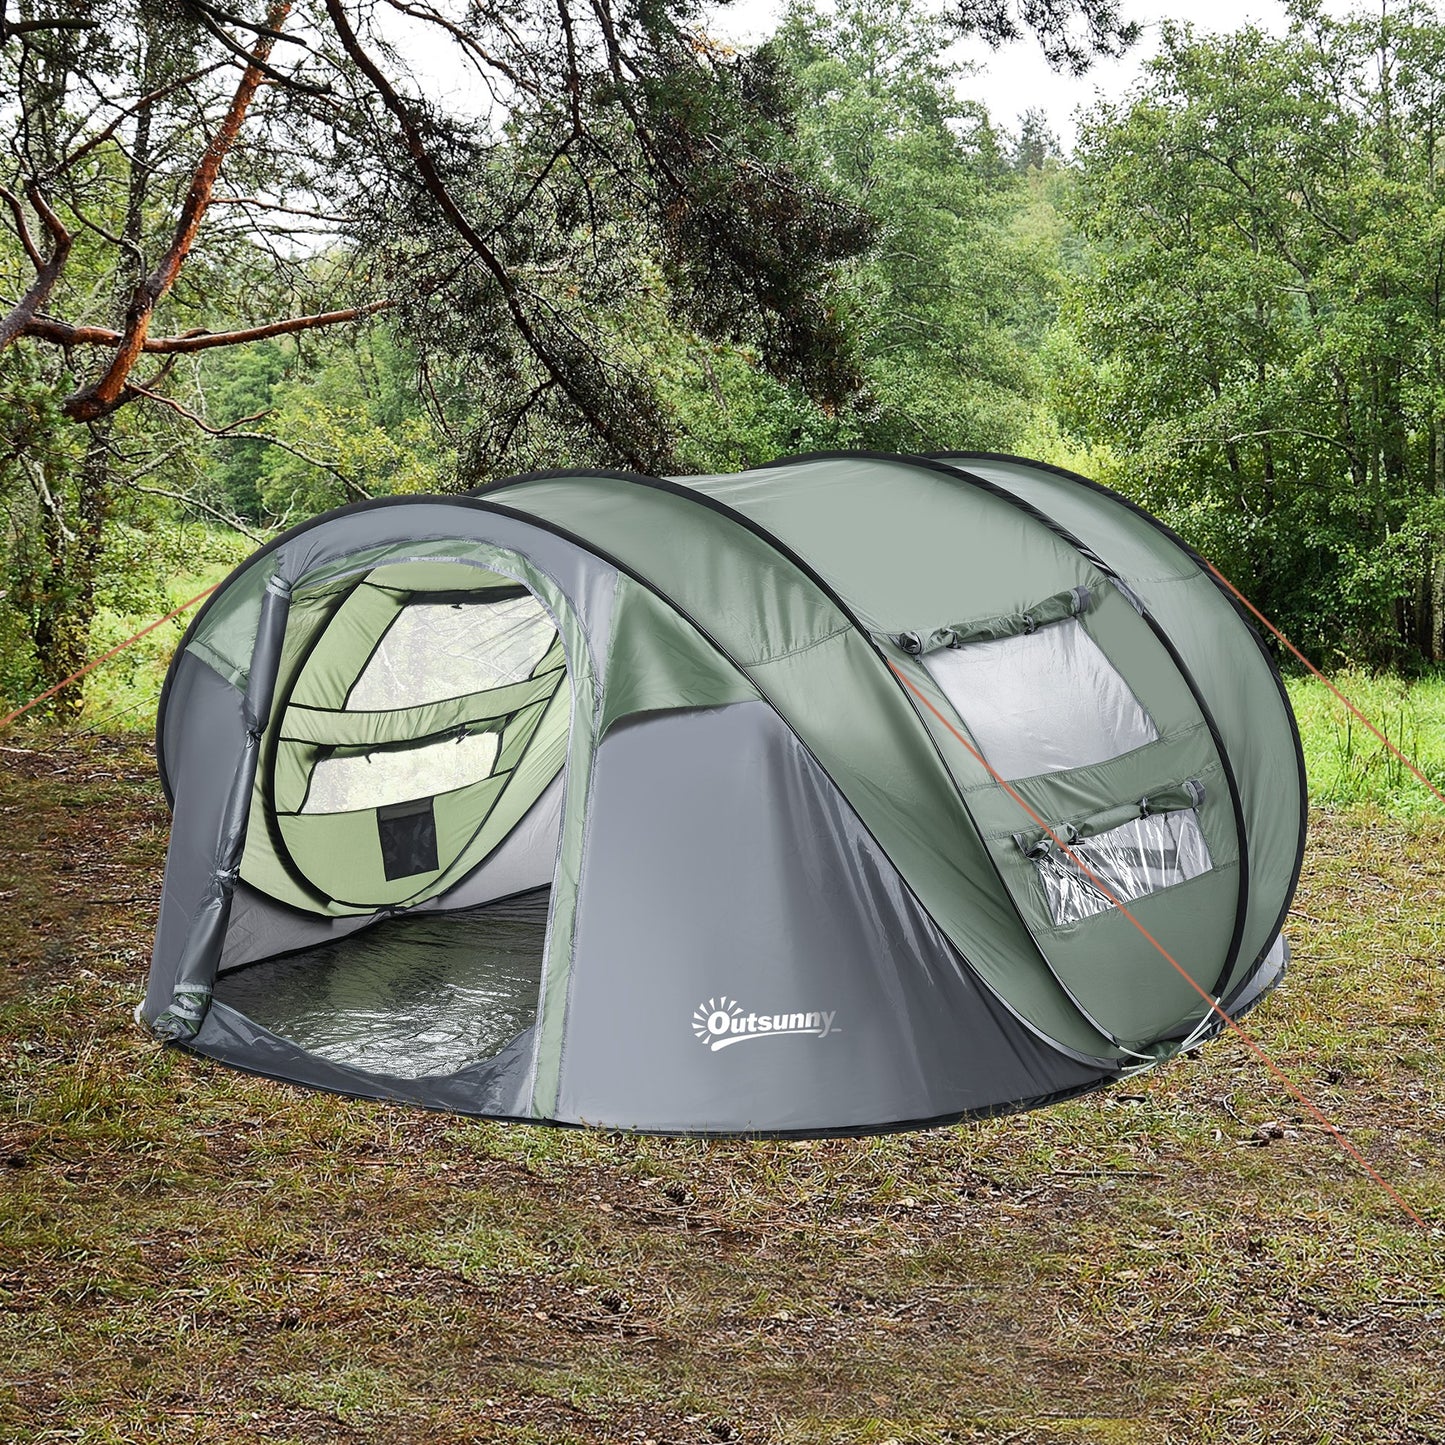 Outsunny 4-5 Person Pop-up Camping Tent Waterproof Family Tent Grey